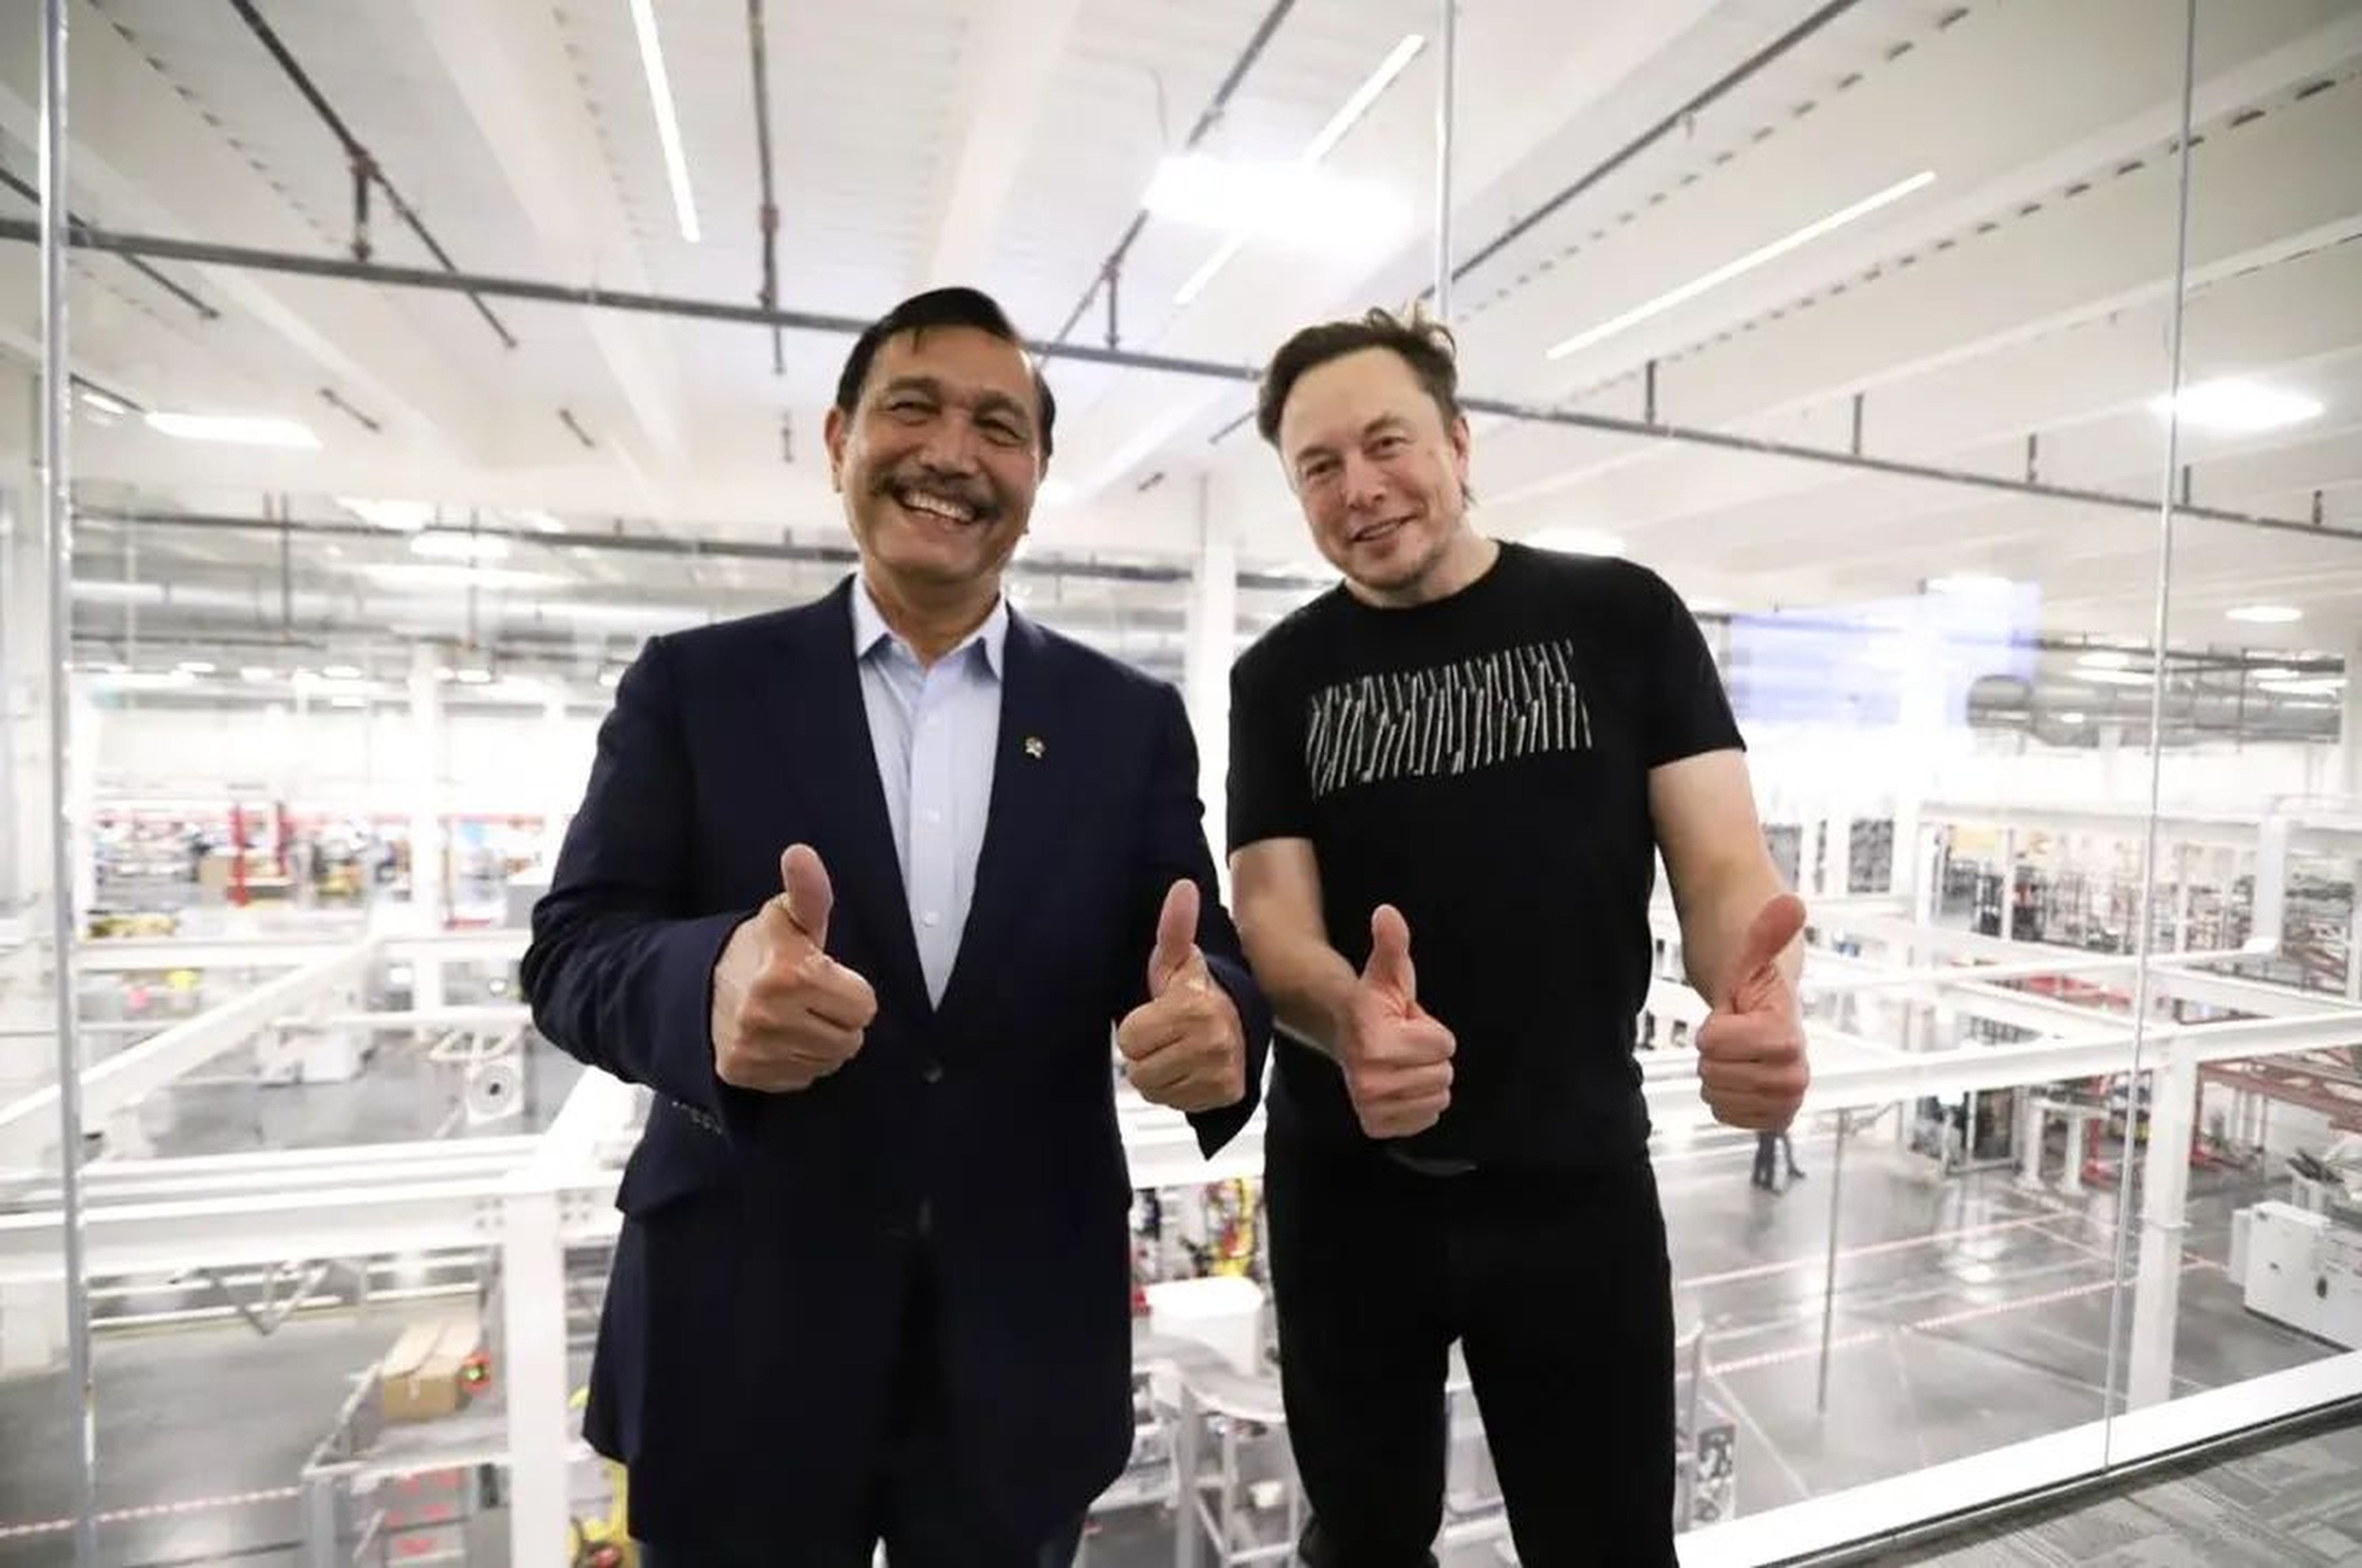 Indonesia’s minister of maritime and investment affairs Luhut Pandjaitan met with the world’s wealthiest man Elon Musk in Texas last week. Luhut offered Musk a pack of Indonesia’s beloved coffee candy kopiko, which got two thumbs up from the Space-X co-fournder. Photo: Instagram